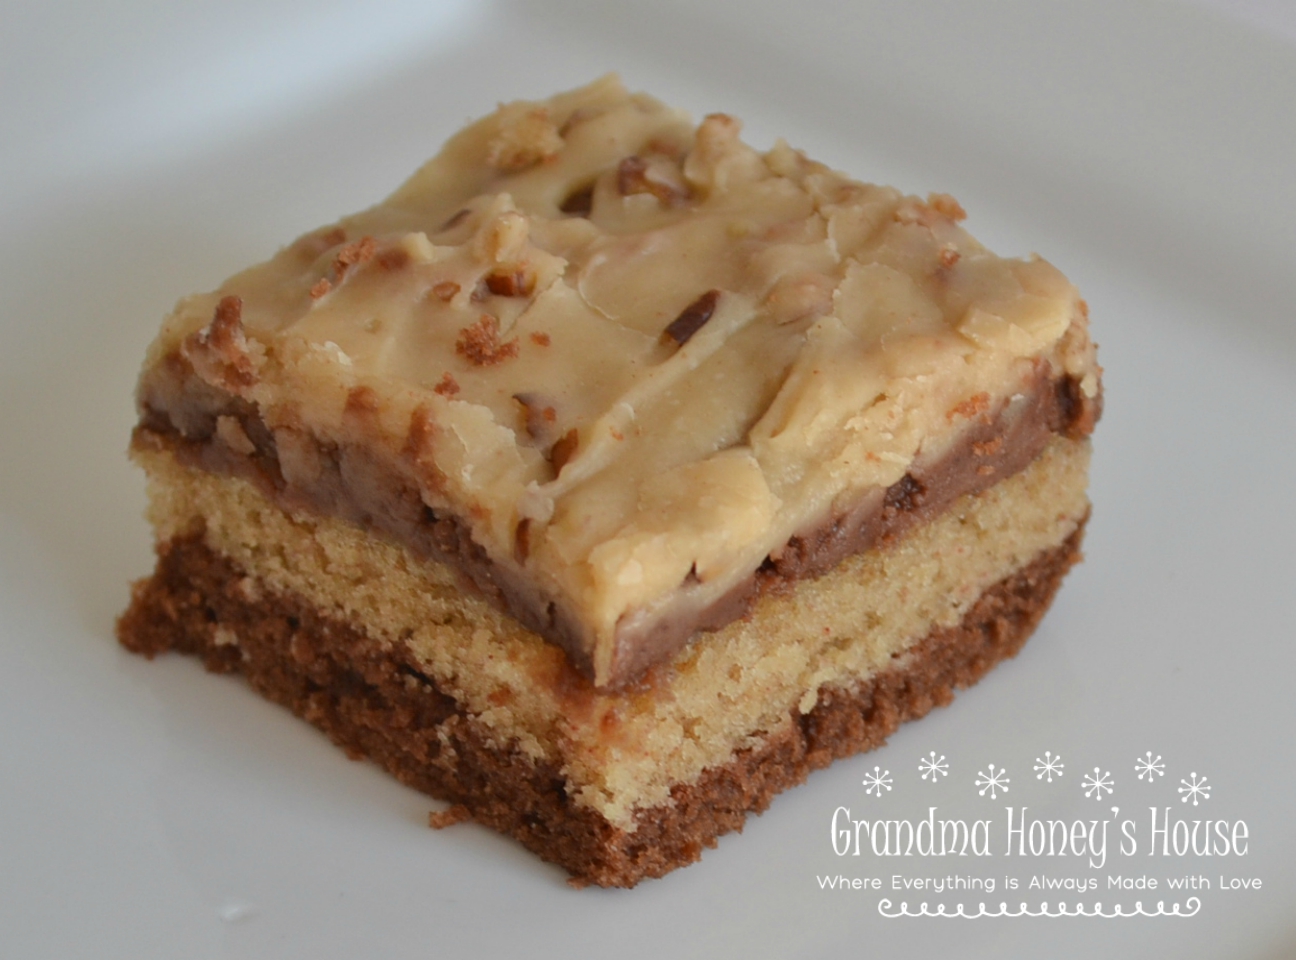 Peanut Butter Chocolate Texas Sheetcake is an awesome dessert. The 2 kinds of sheet cakes are combined and topped with 2 kinds of frosting. 